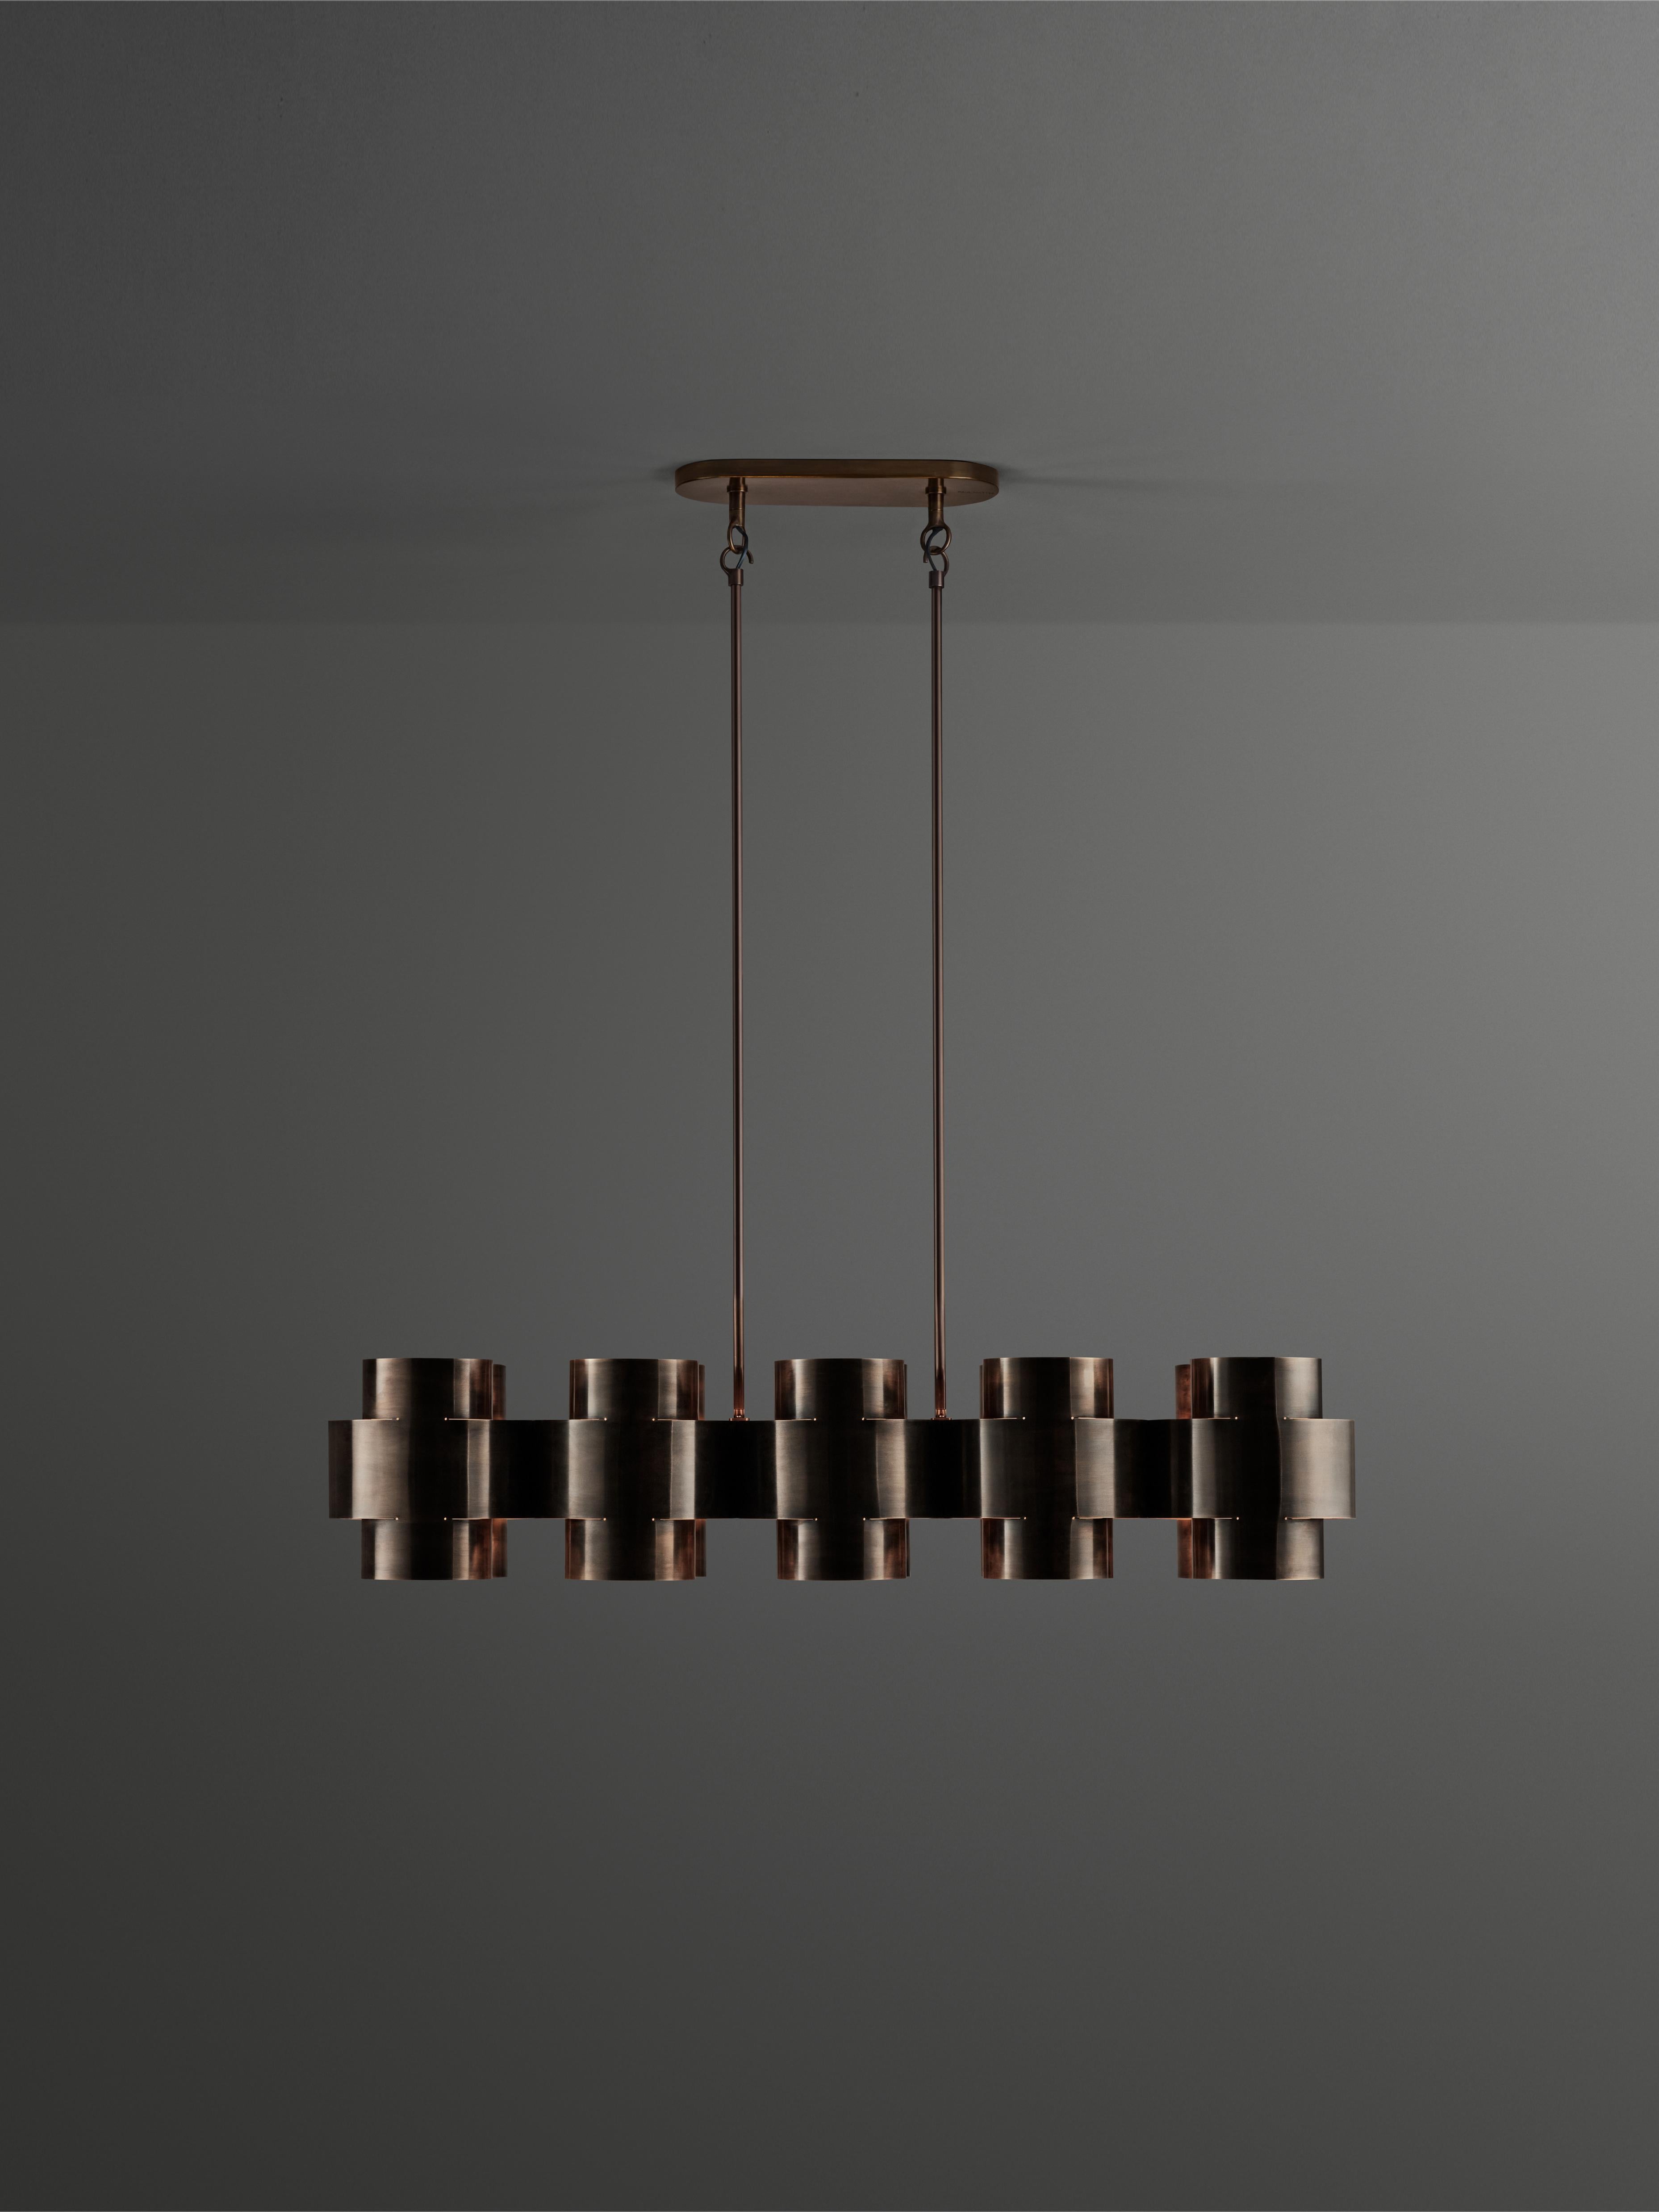 Dark Aged Brass Plus Ten Chandelier by Paul Matter
Dimensions: W 120 x D 33 x H 53 cm (Minimun drop lenght)
Materials: Dark Aged Brass
Drop Length/Height can be customized. Please contact us for any request.

10 Type E27 / E26 Medium Base
3W - 5W